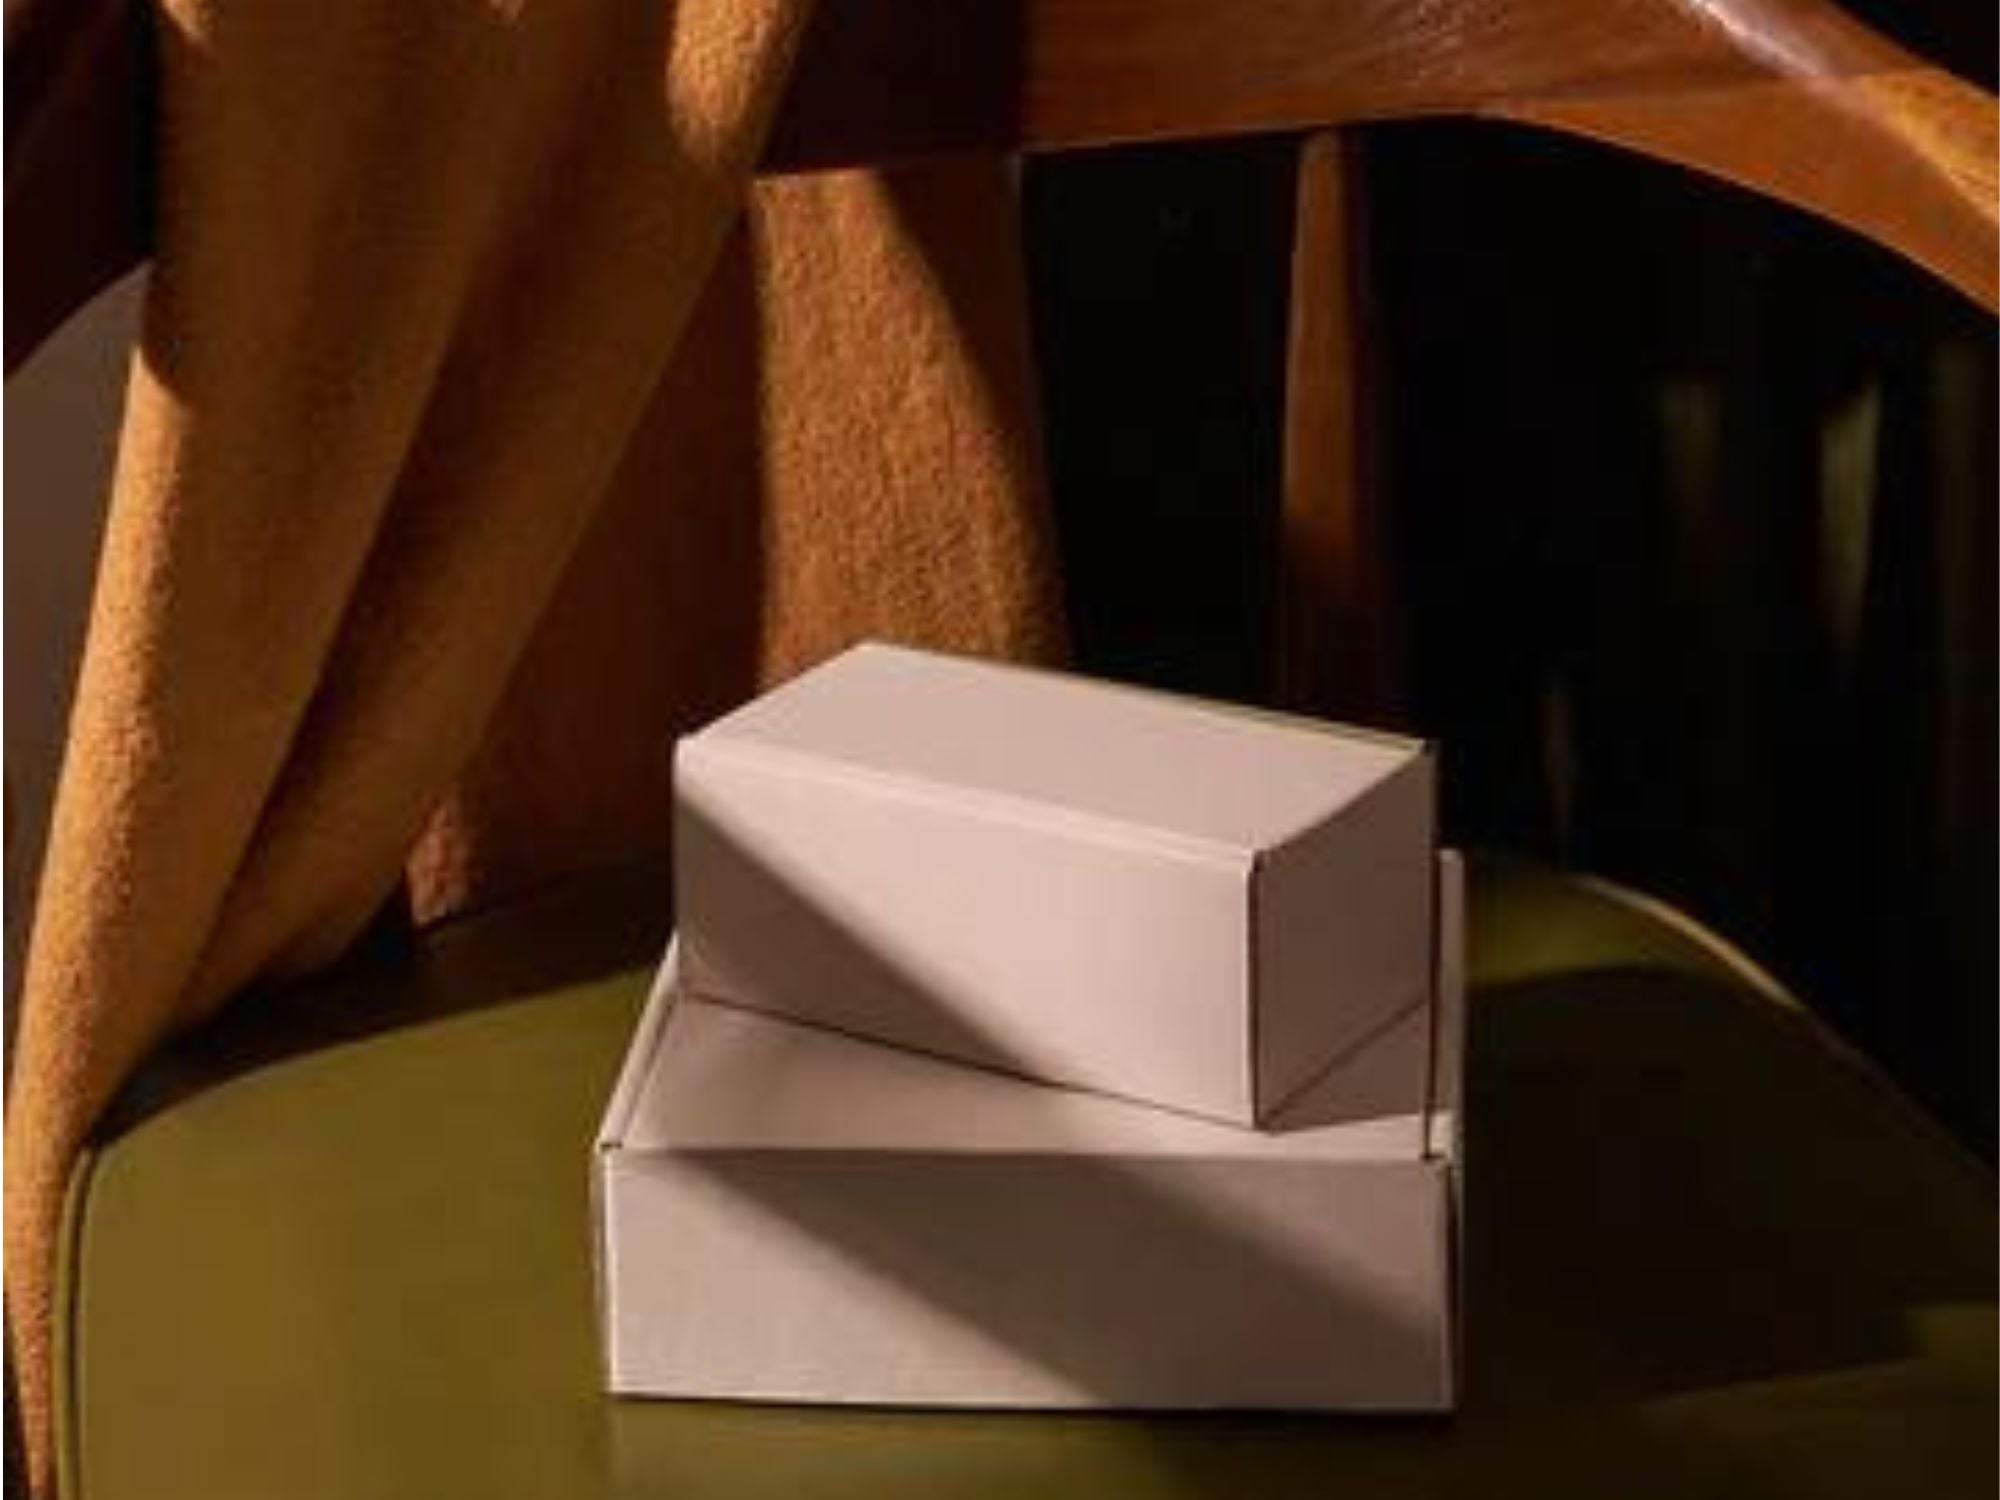 pleasure gap will always ship your order in plain cardboard packaging, so you don't need to worry about any nosey neighbours. The image shows 2 plain white cardboard boxes resting on a chair.